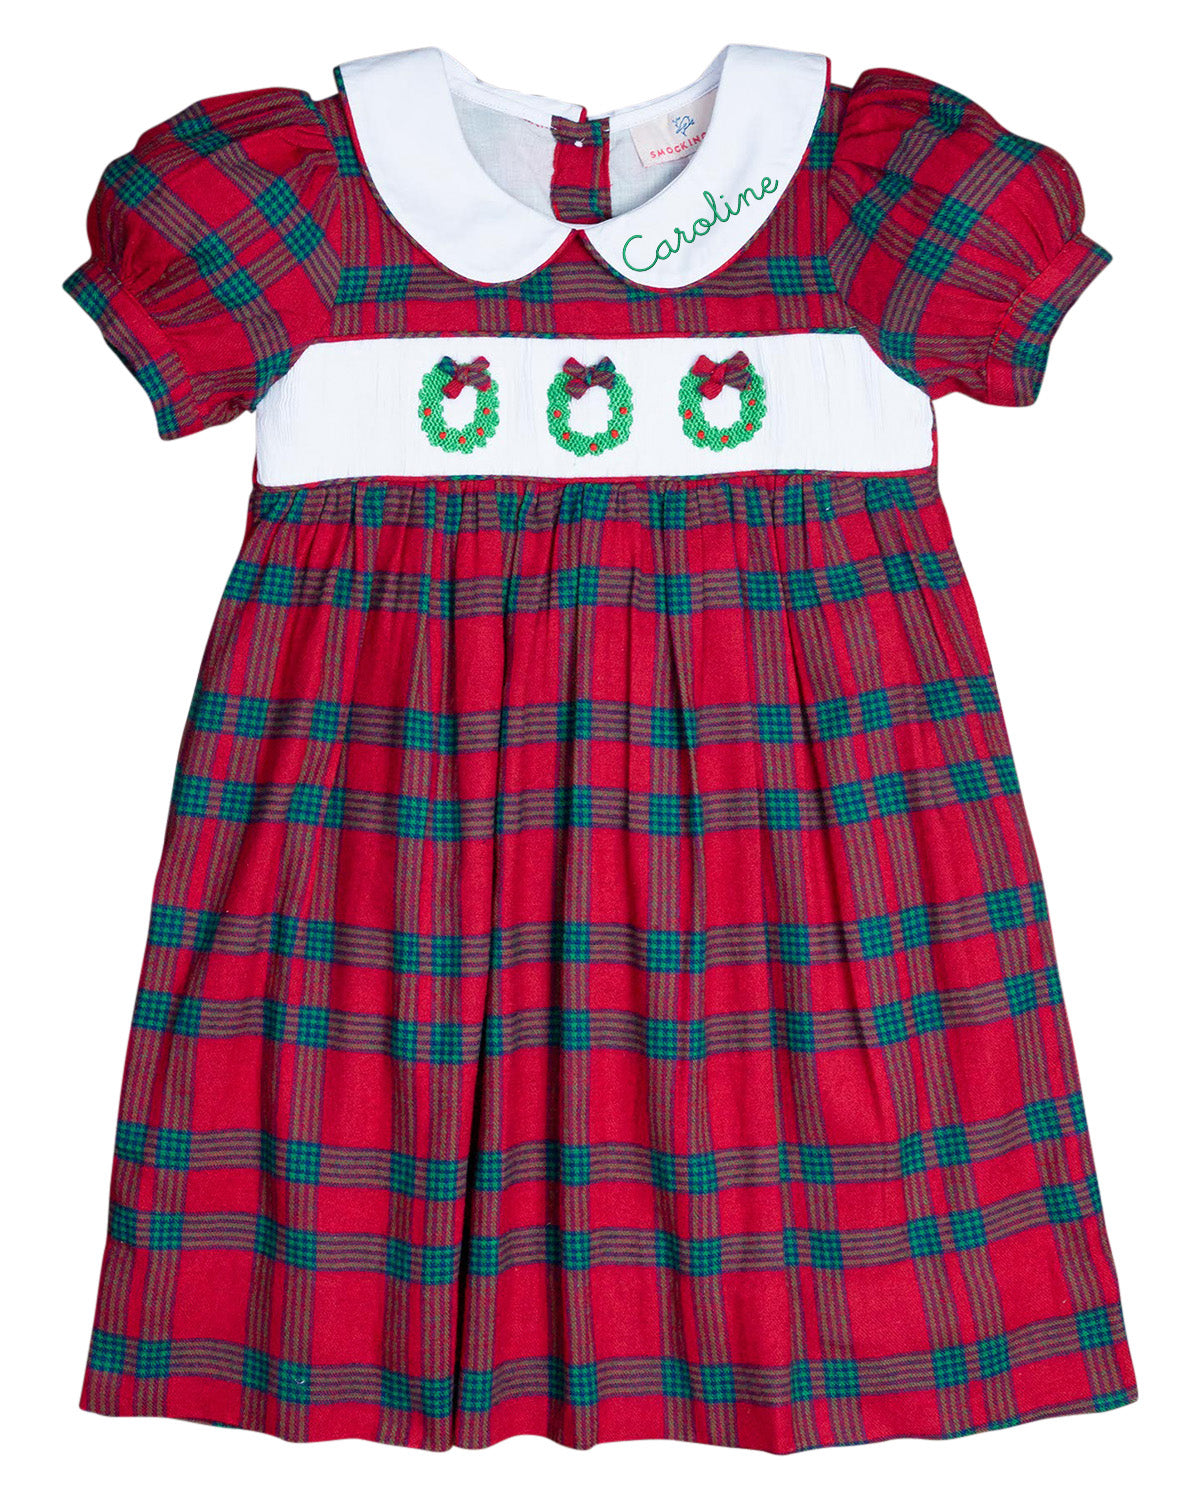 Wreath Smocked Red and Green Plaid Jumper